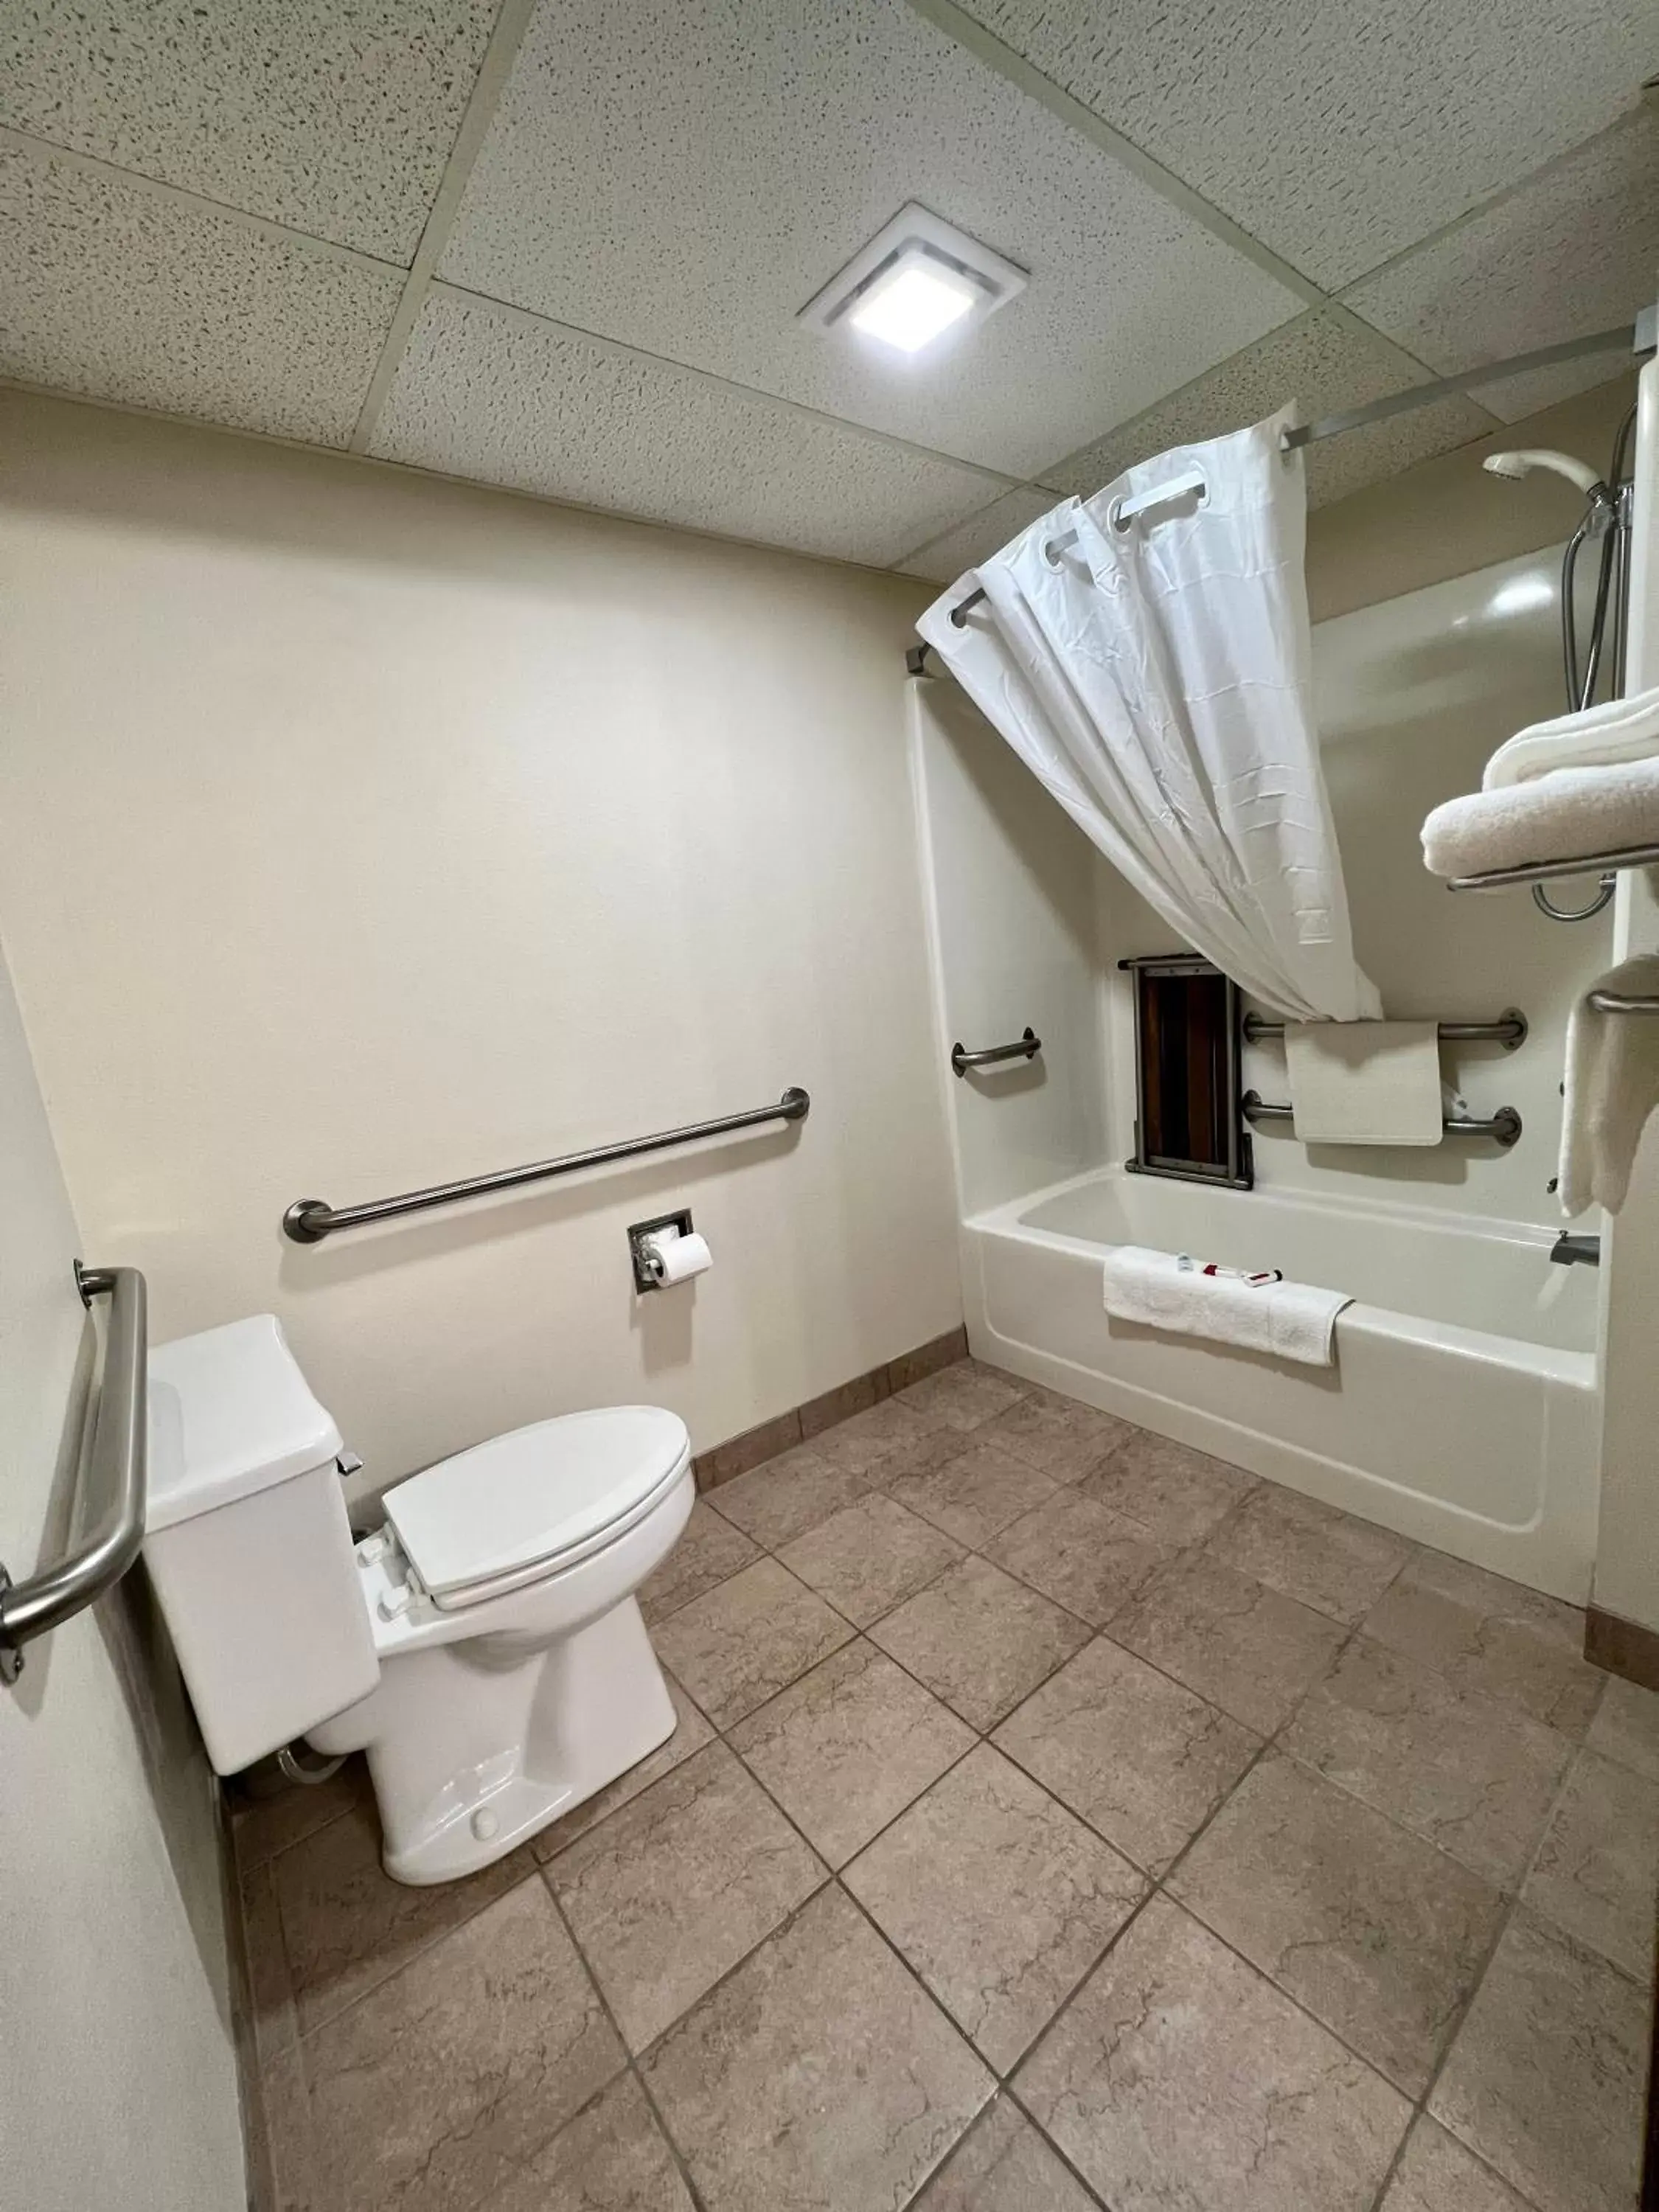 Facility for disabled guests, Bathroom in Reston Inn & Suites